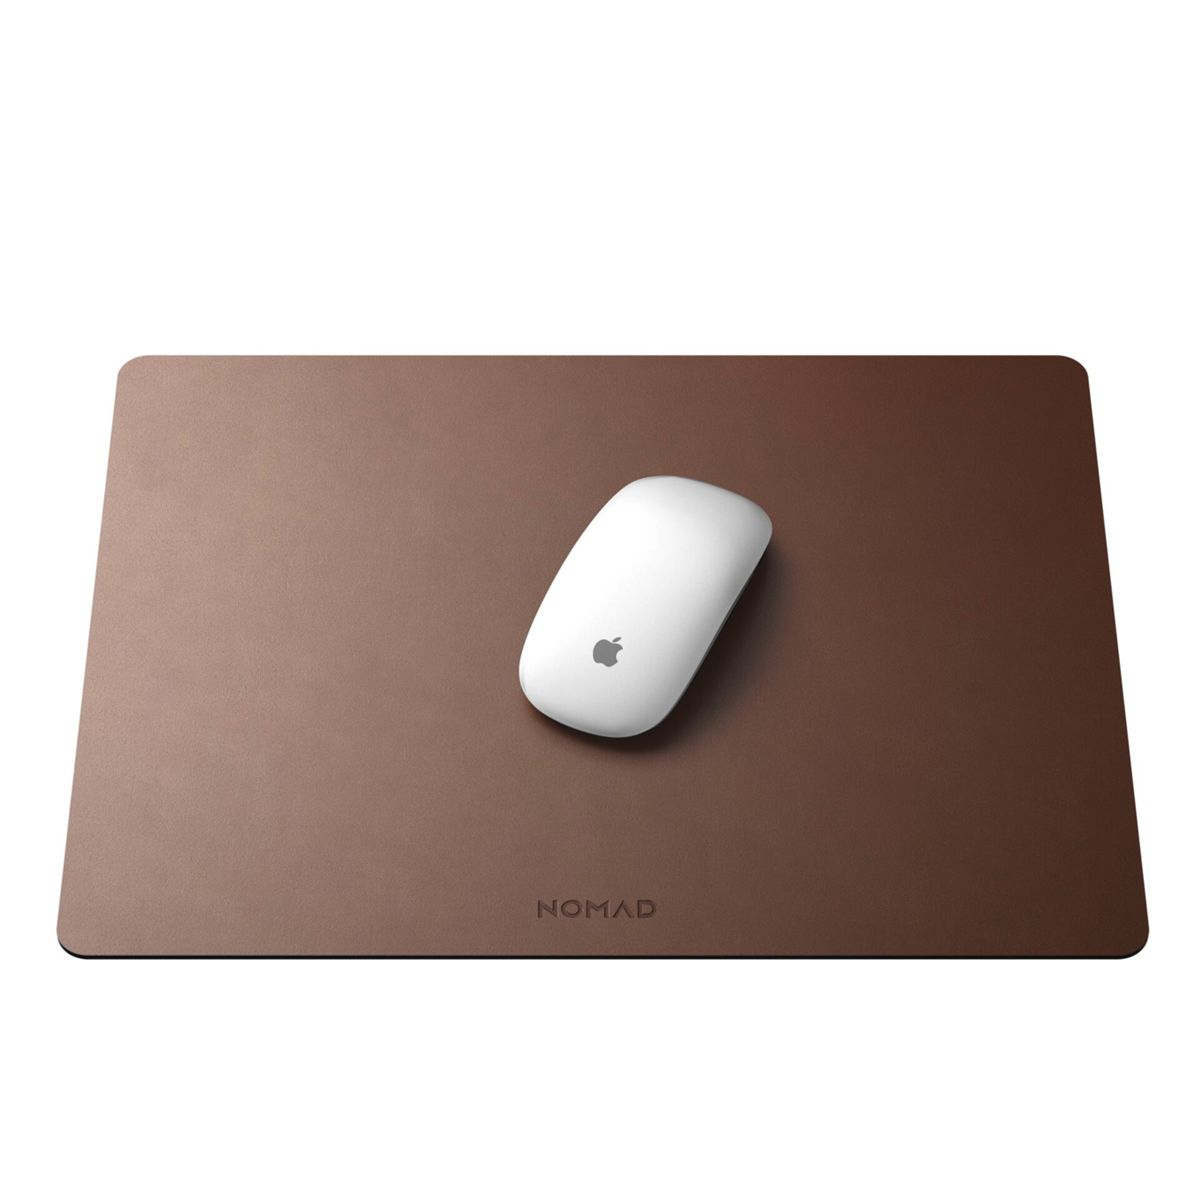 Rustic Mousepad NOMAD Leather Brown Mauspad 16-Inch,